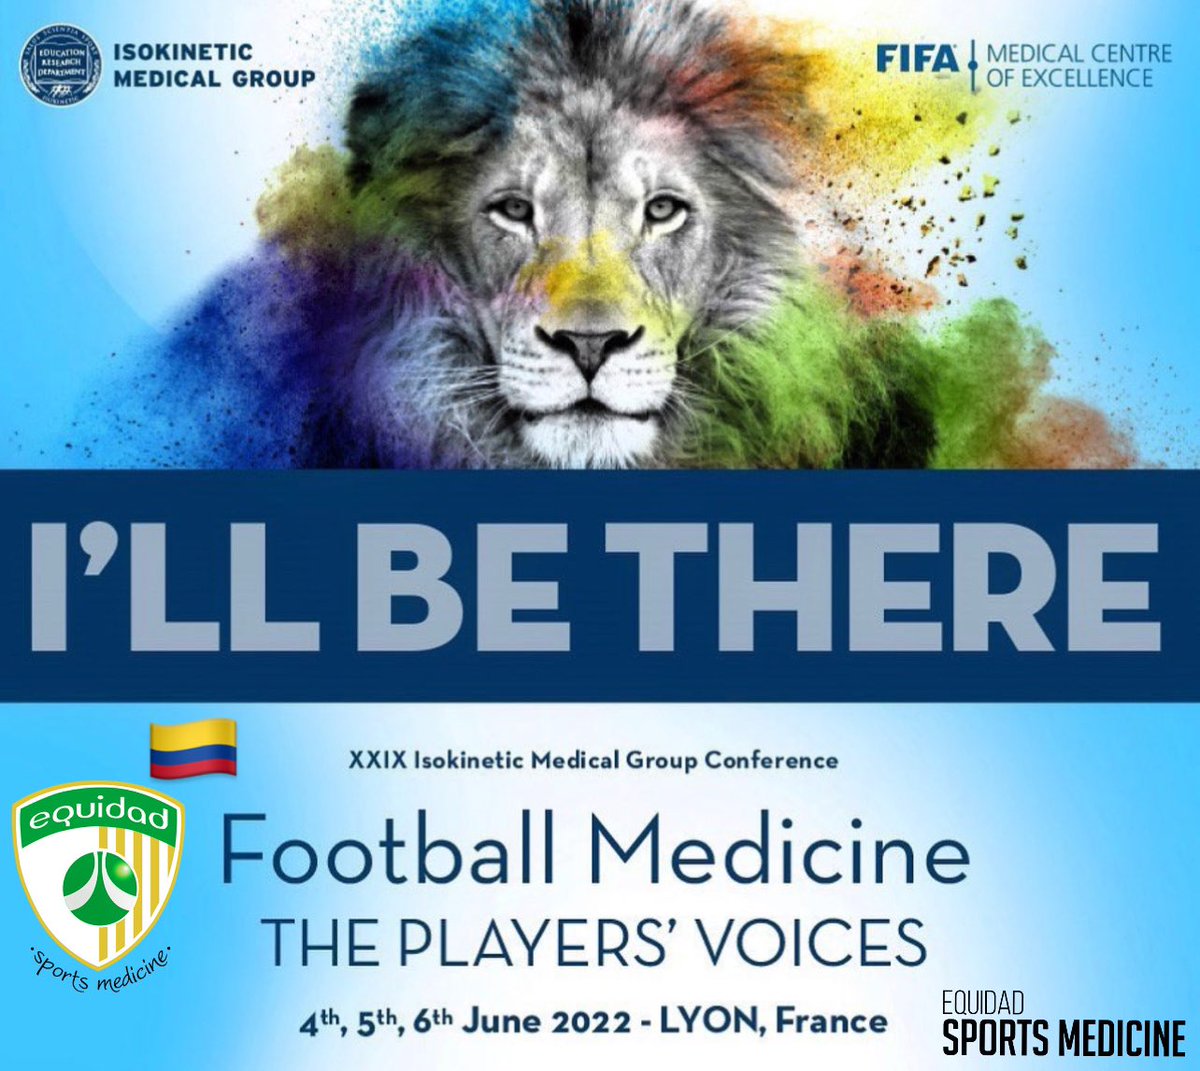 I’LL BE THERE @footballmed 📍LYON 🦁 France 🇫🇷 🗓 4-6 June/2022 The best sports medicine conference 🌍 See you soon 🔜 @Equidadfutbol @EquidadSportsMD Colombia 🇨🇴👨🏻‍⚕️ #isok22 Never Stop Learning 📚